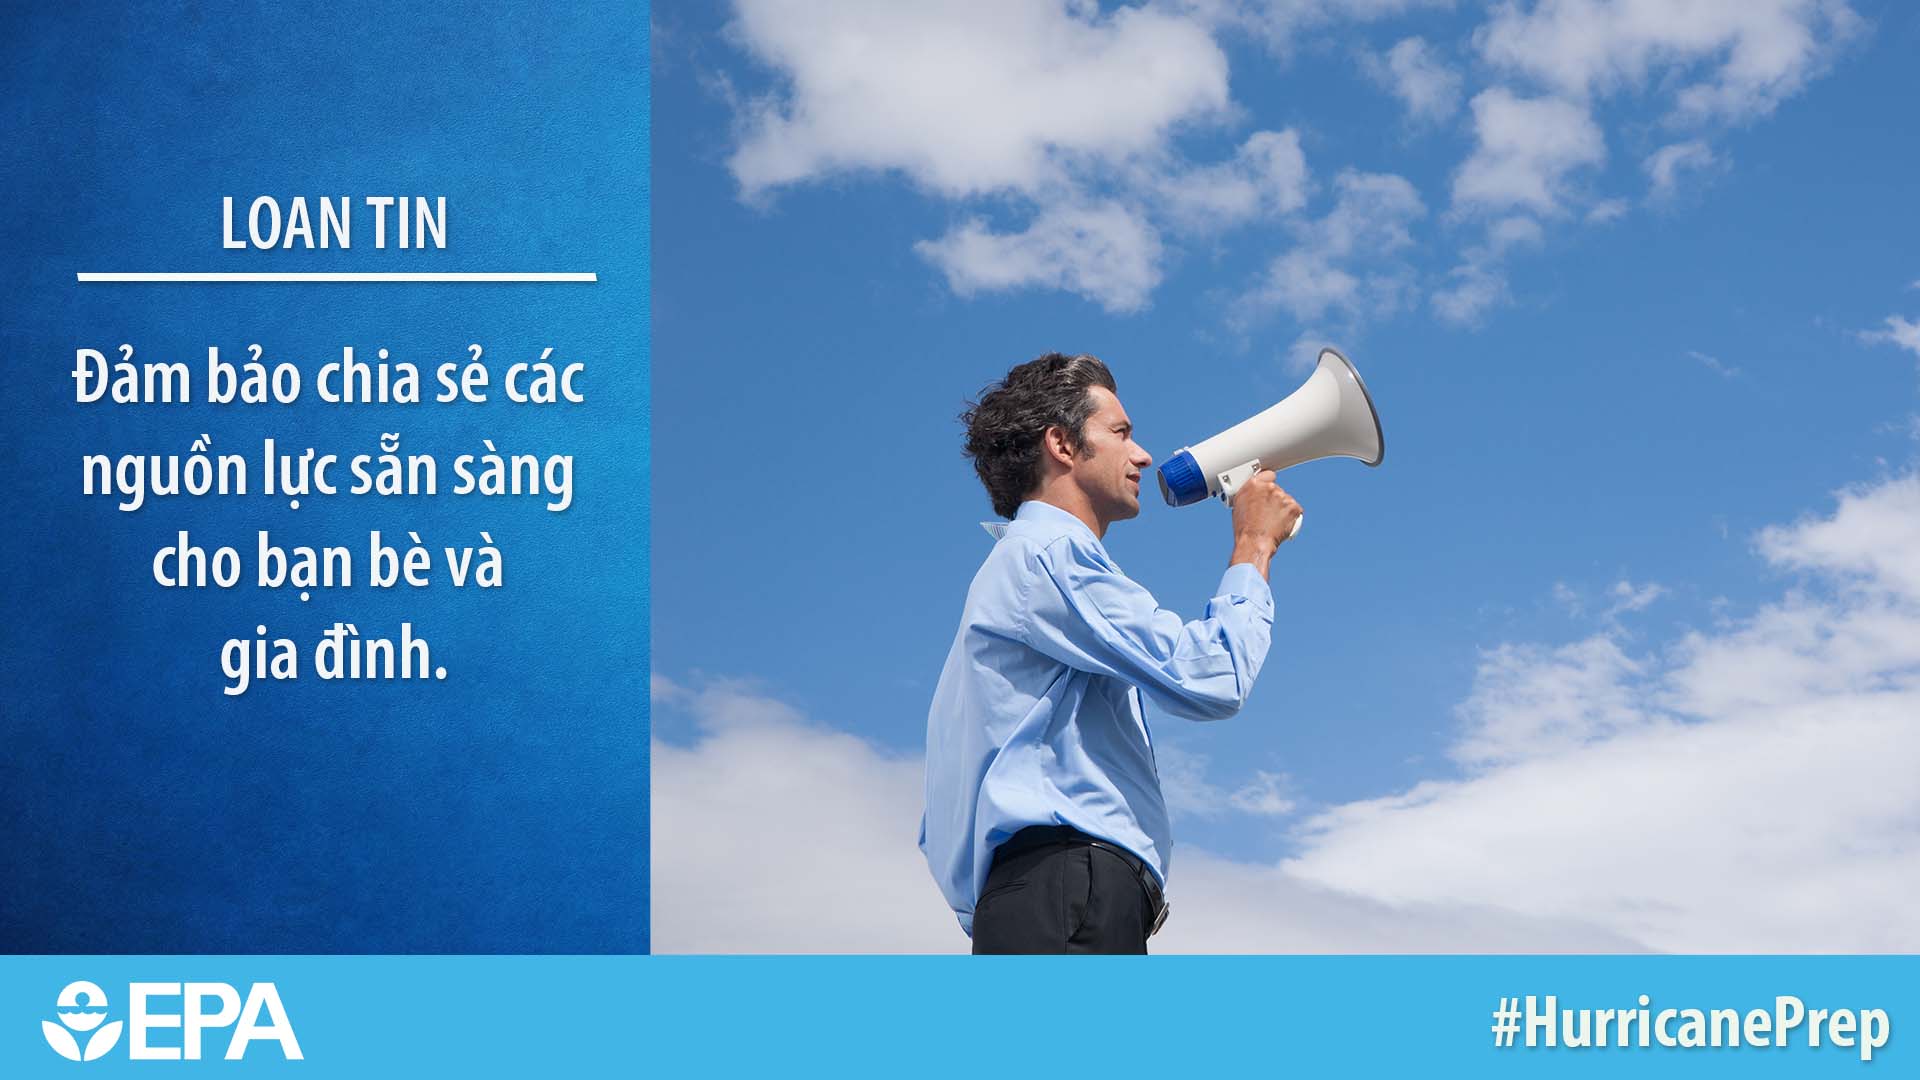 Vietnamese text and photo of a man outside speaking through a megaphone